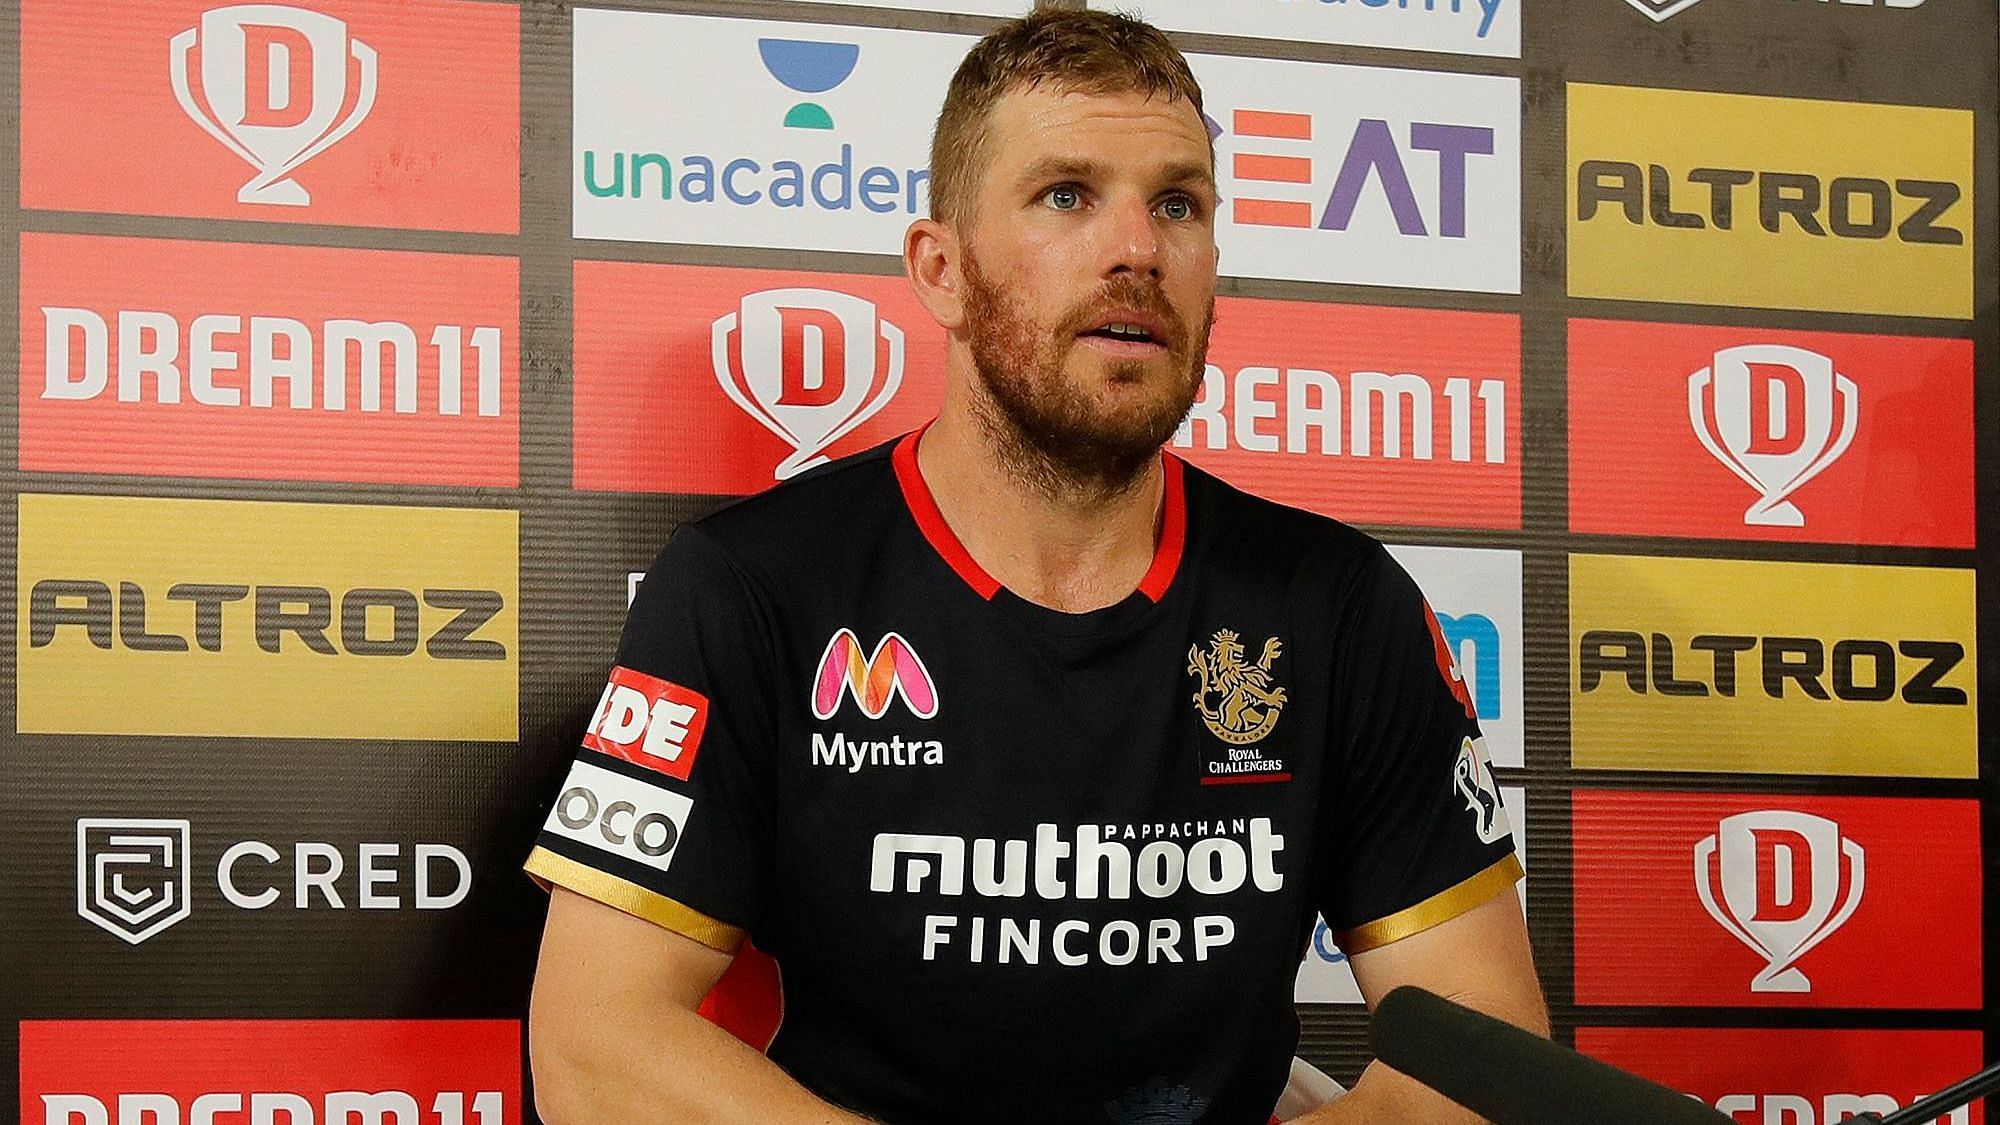 Aaron Finch, playing his first game for Royal Challengers Bangalore on winning in the first game of the IPL 2020